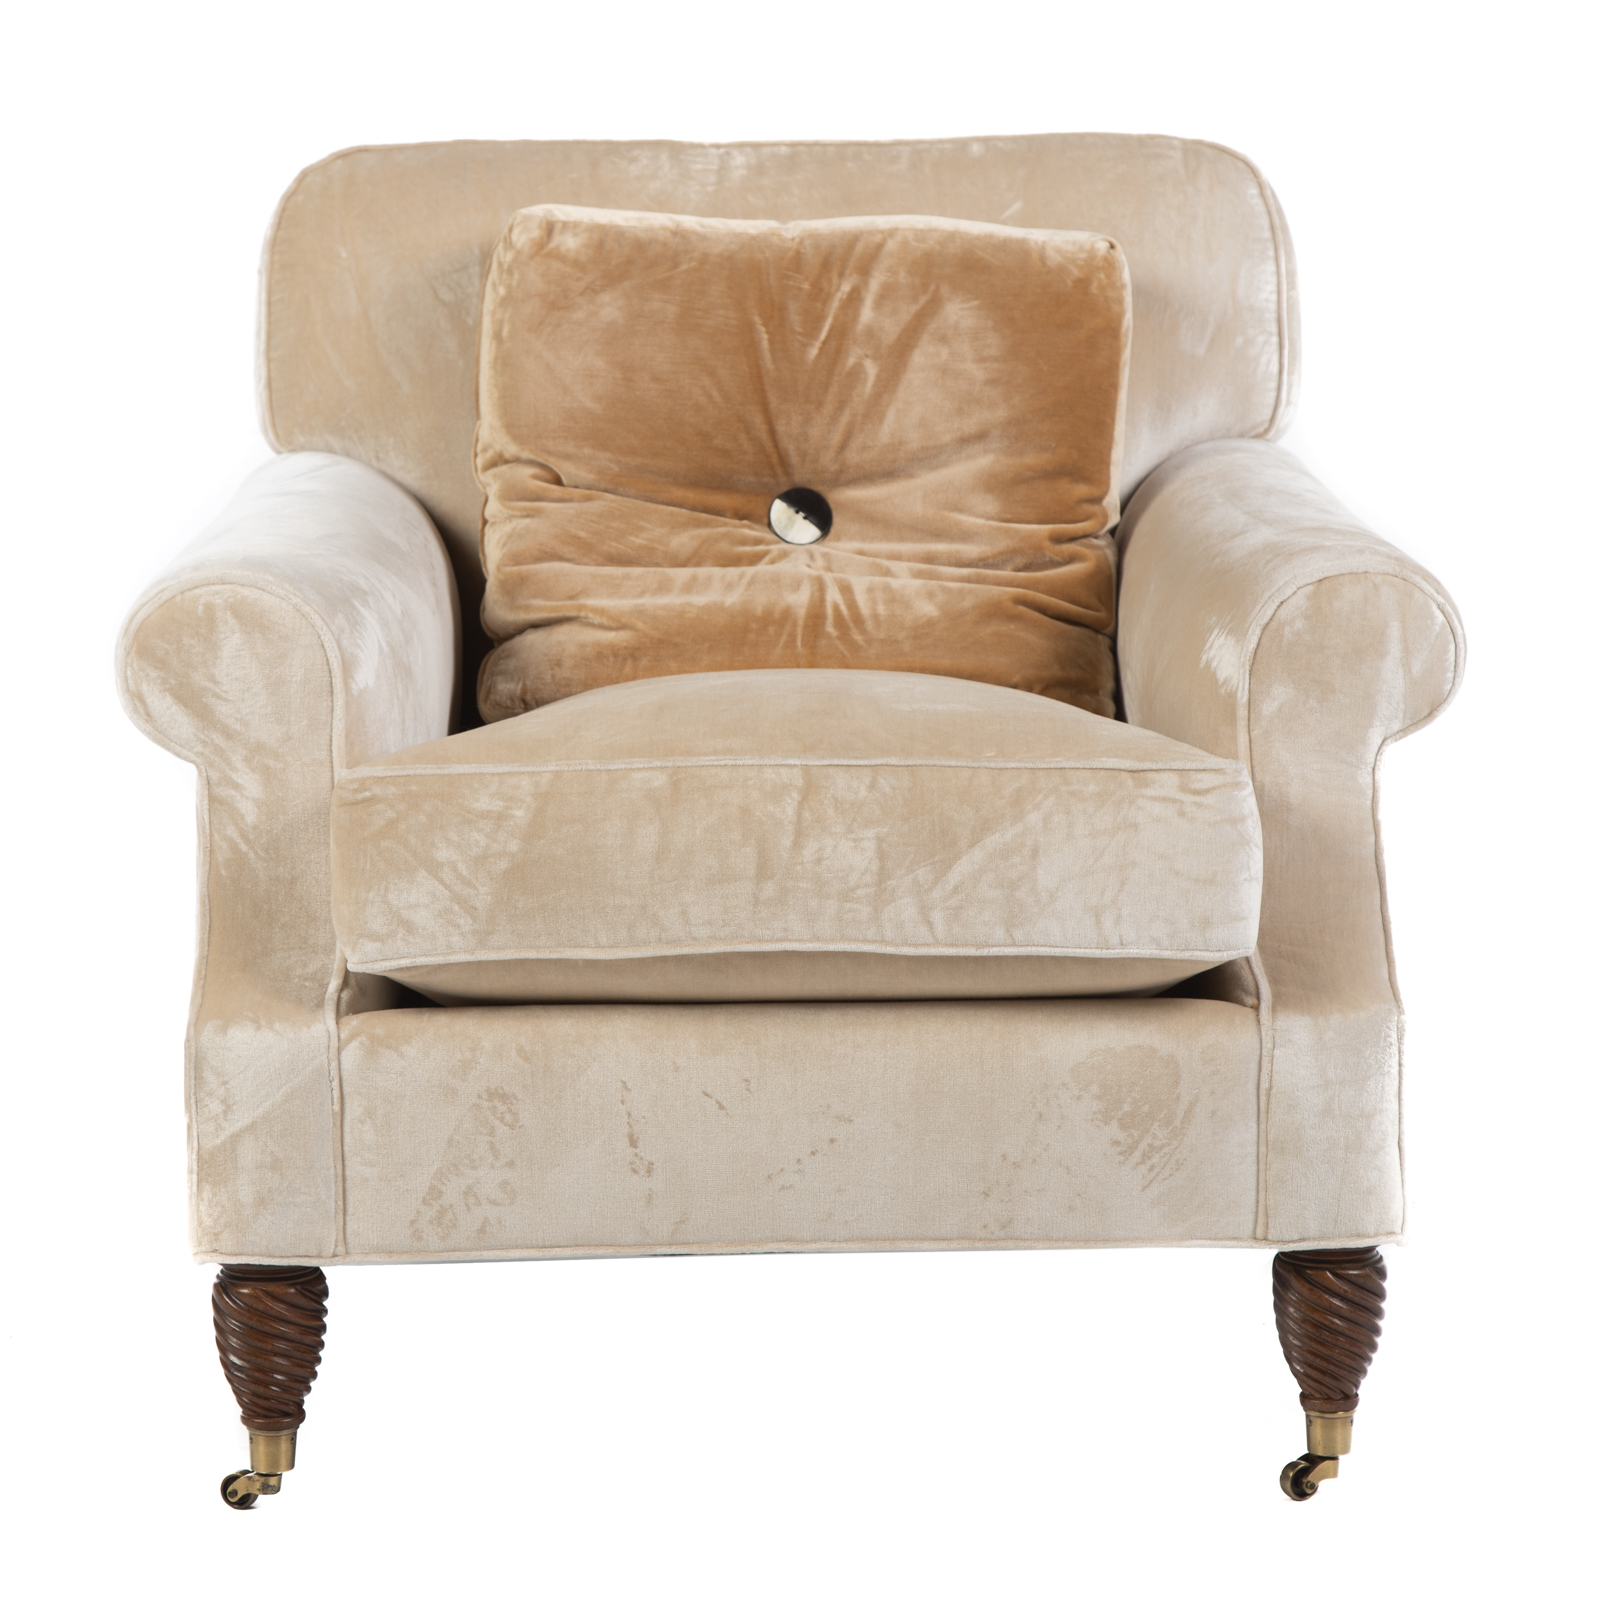 CONTEMPORARY UPHOLSTERED ARM CHAIR 2875c6